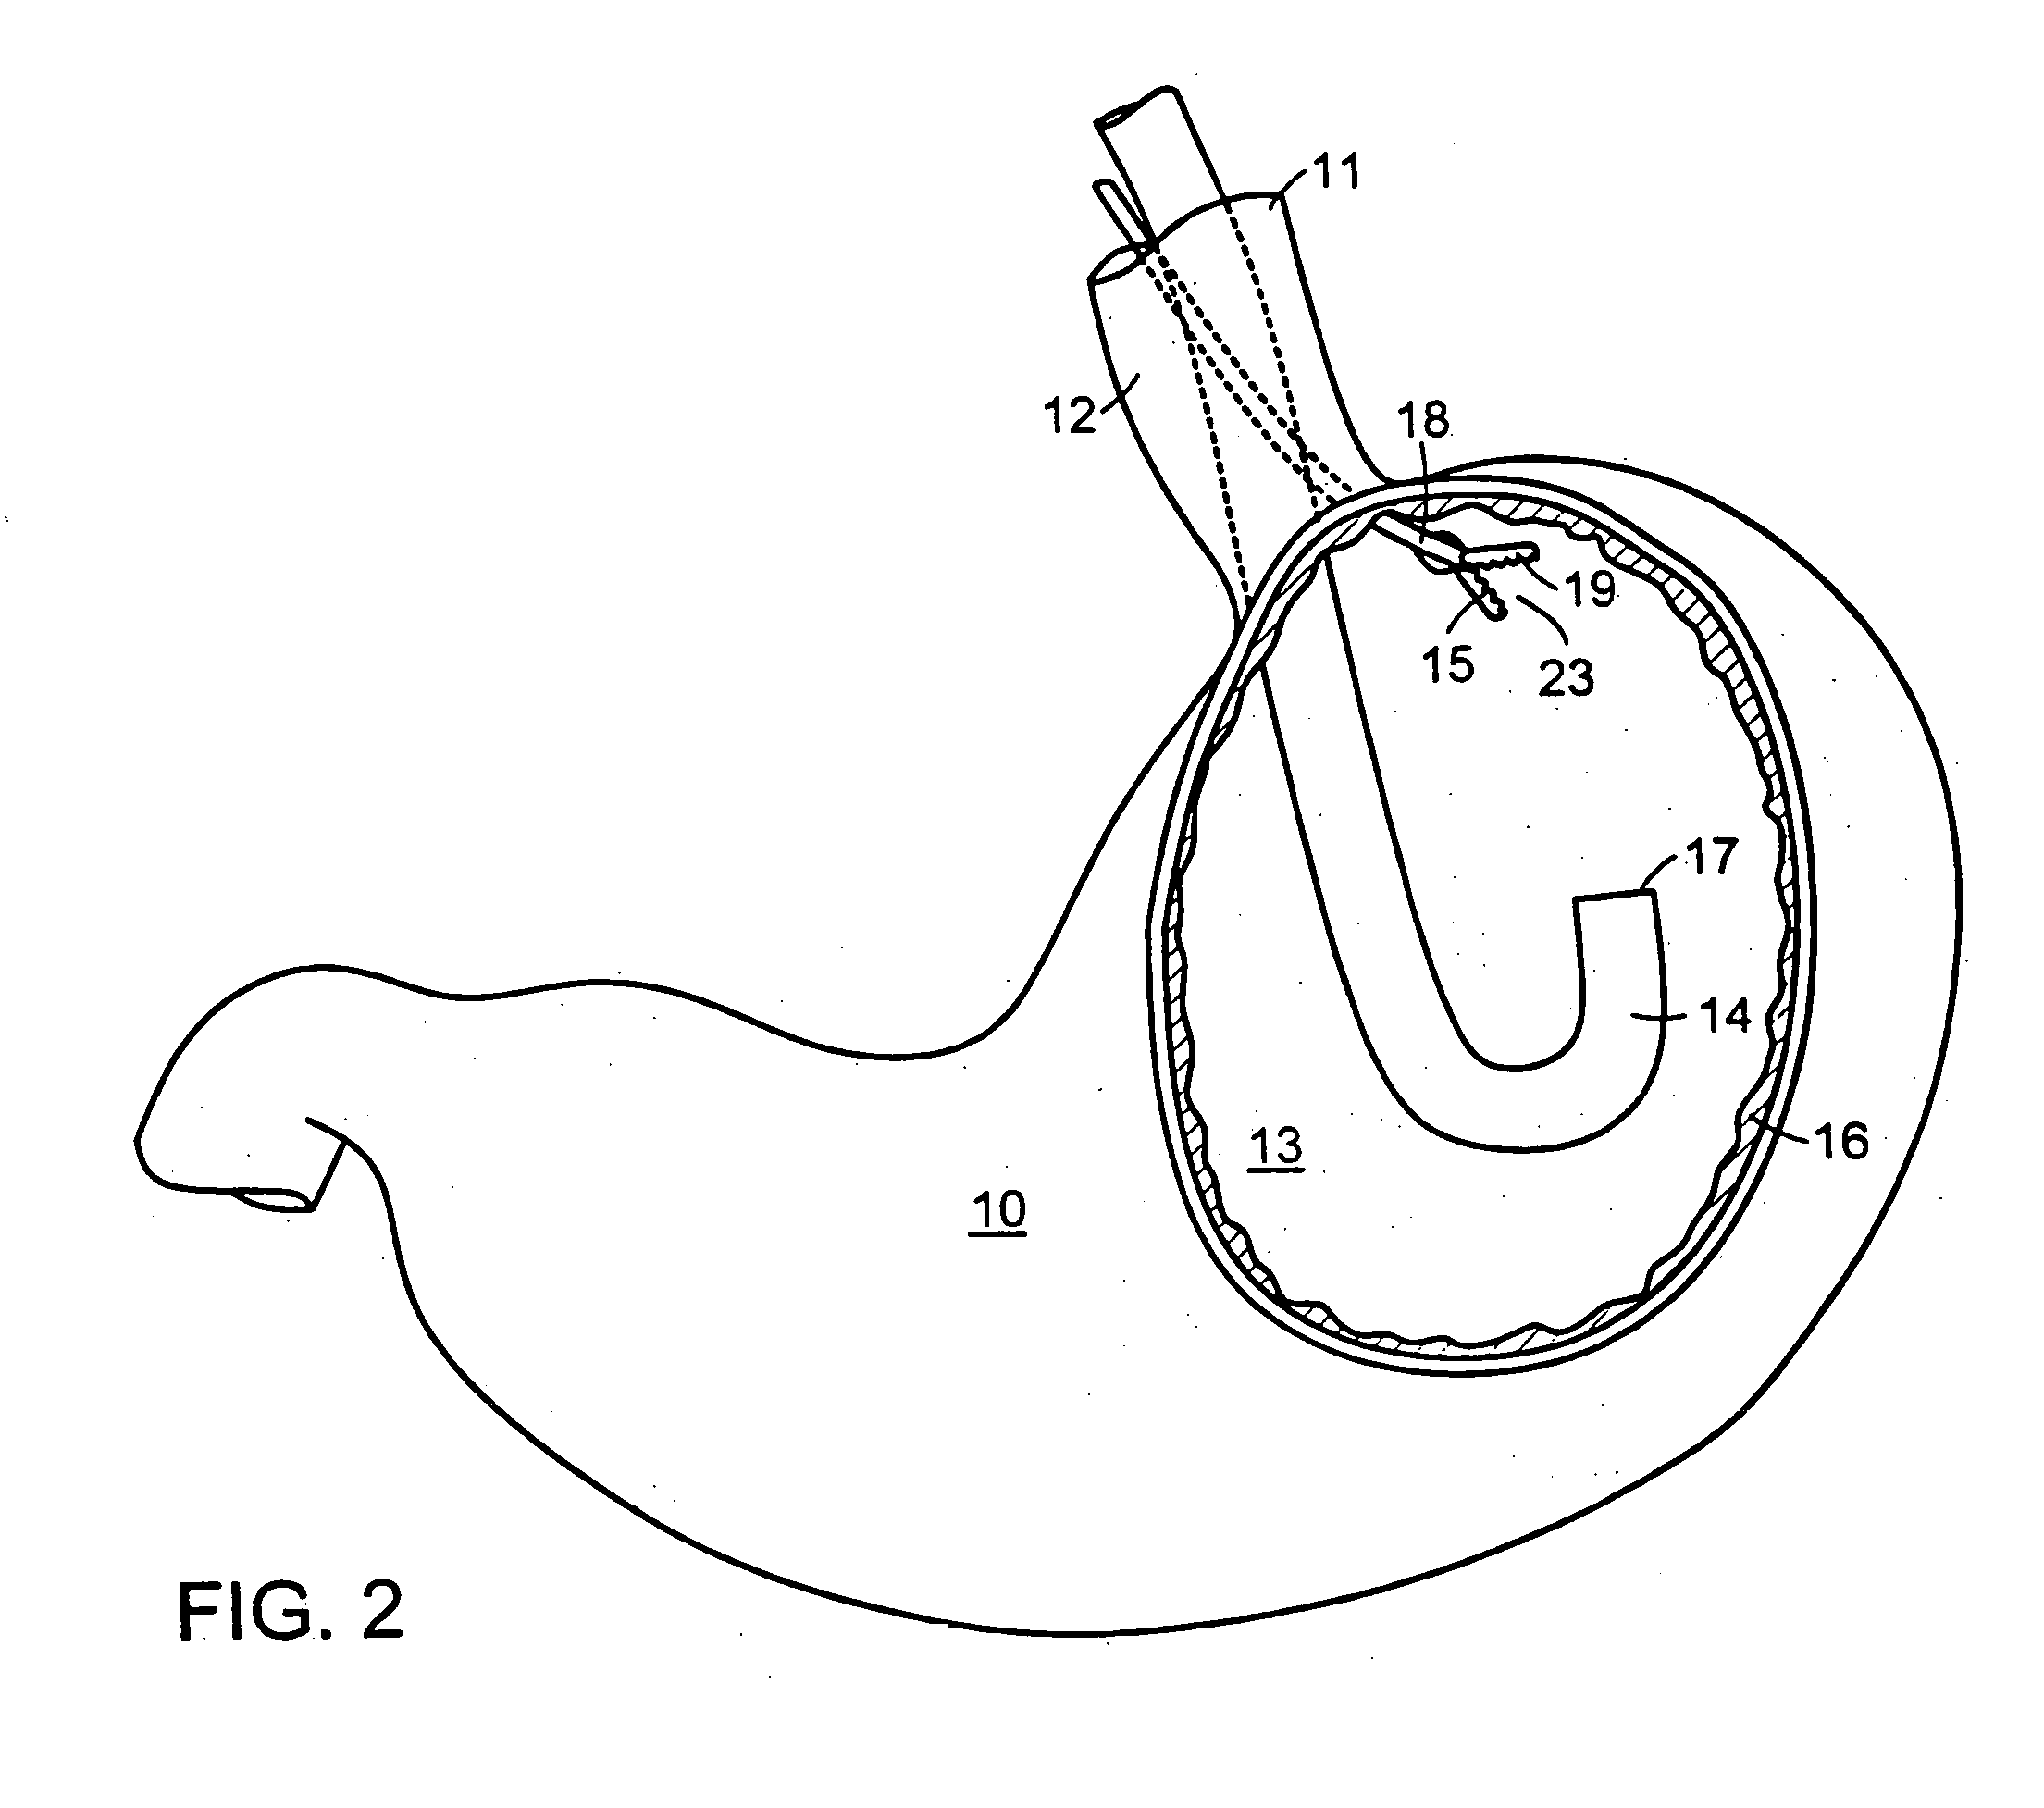 Methods and devices for tissue reconfiguration